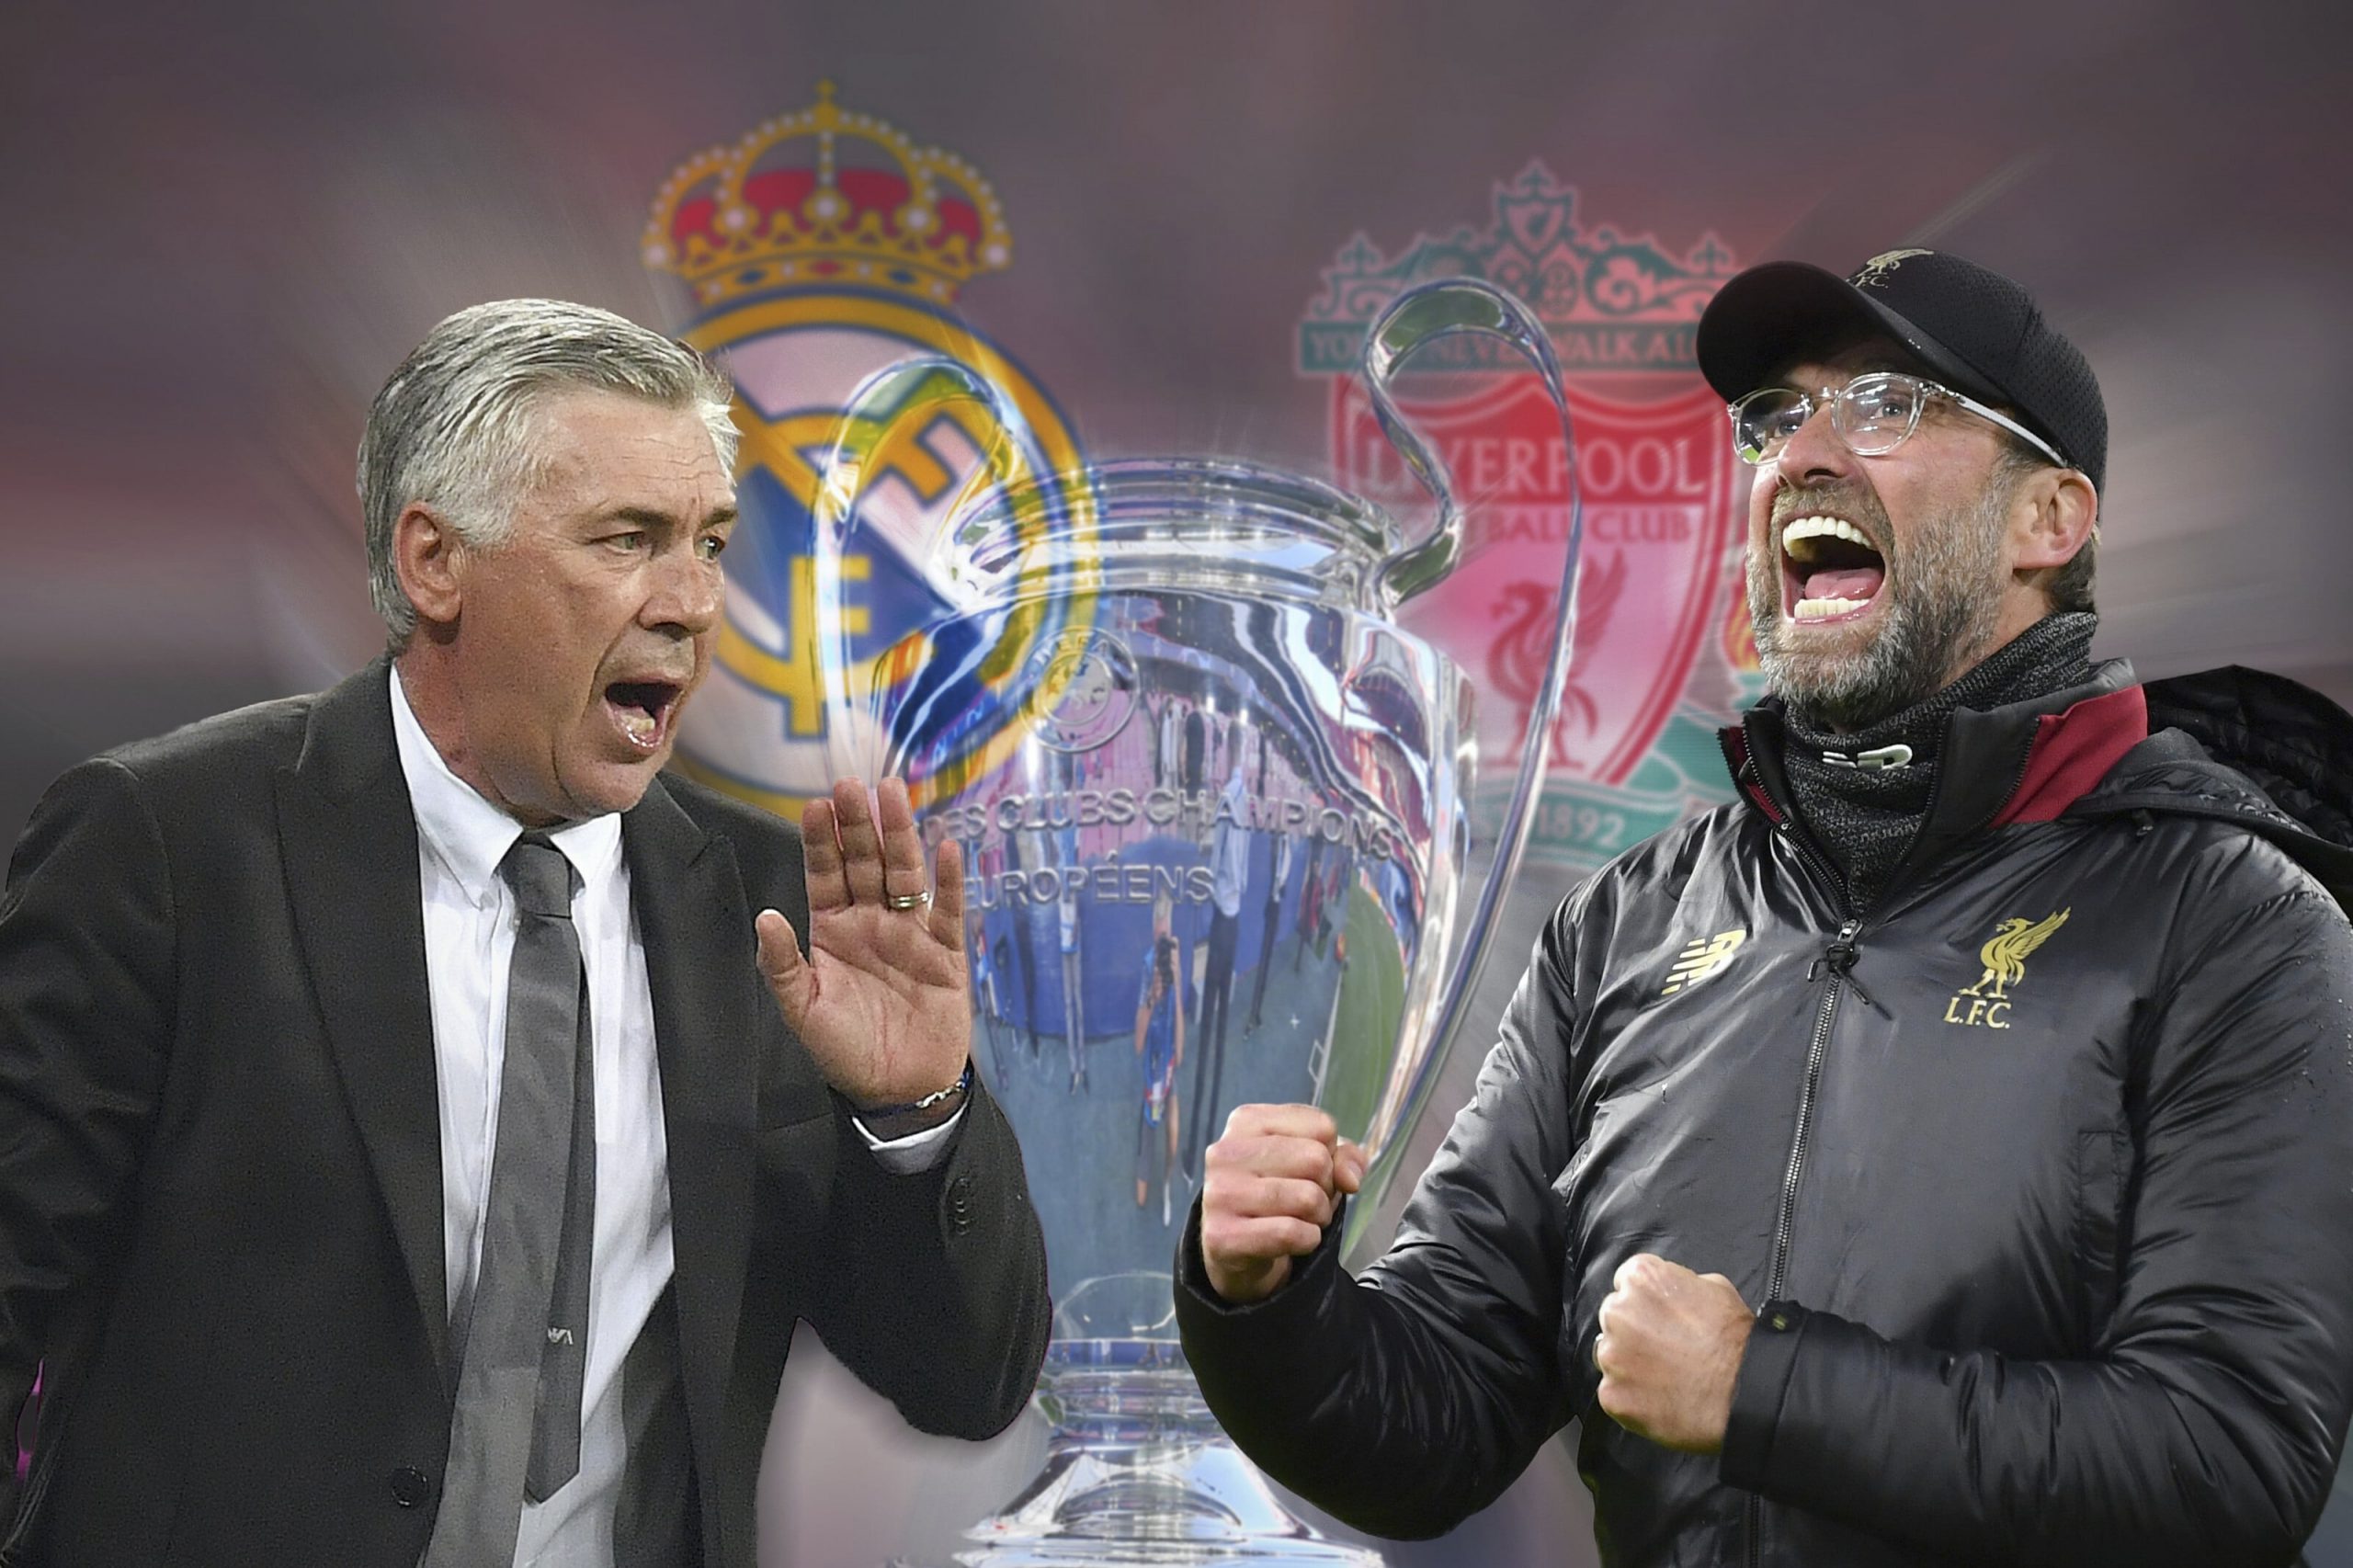 Preview of the Champions League final FC Liverpool - Real Madrid on May 28, 2022 in Paris.